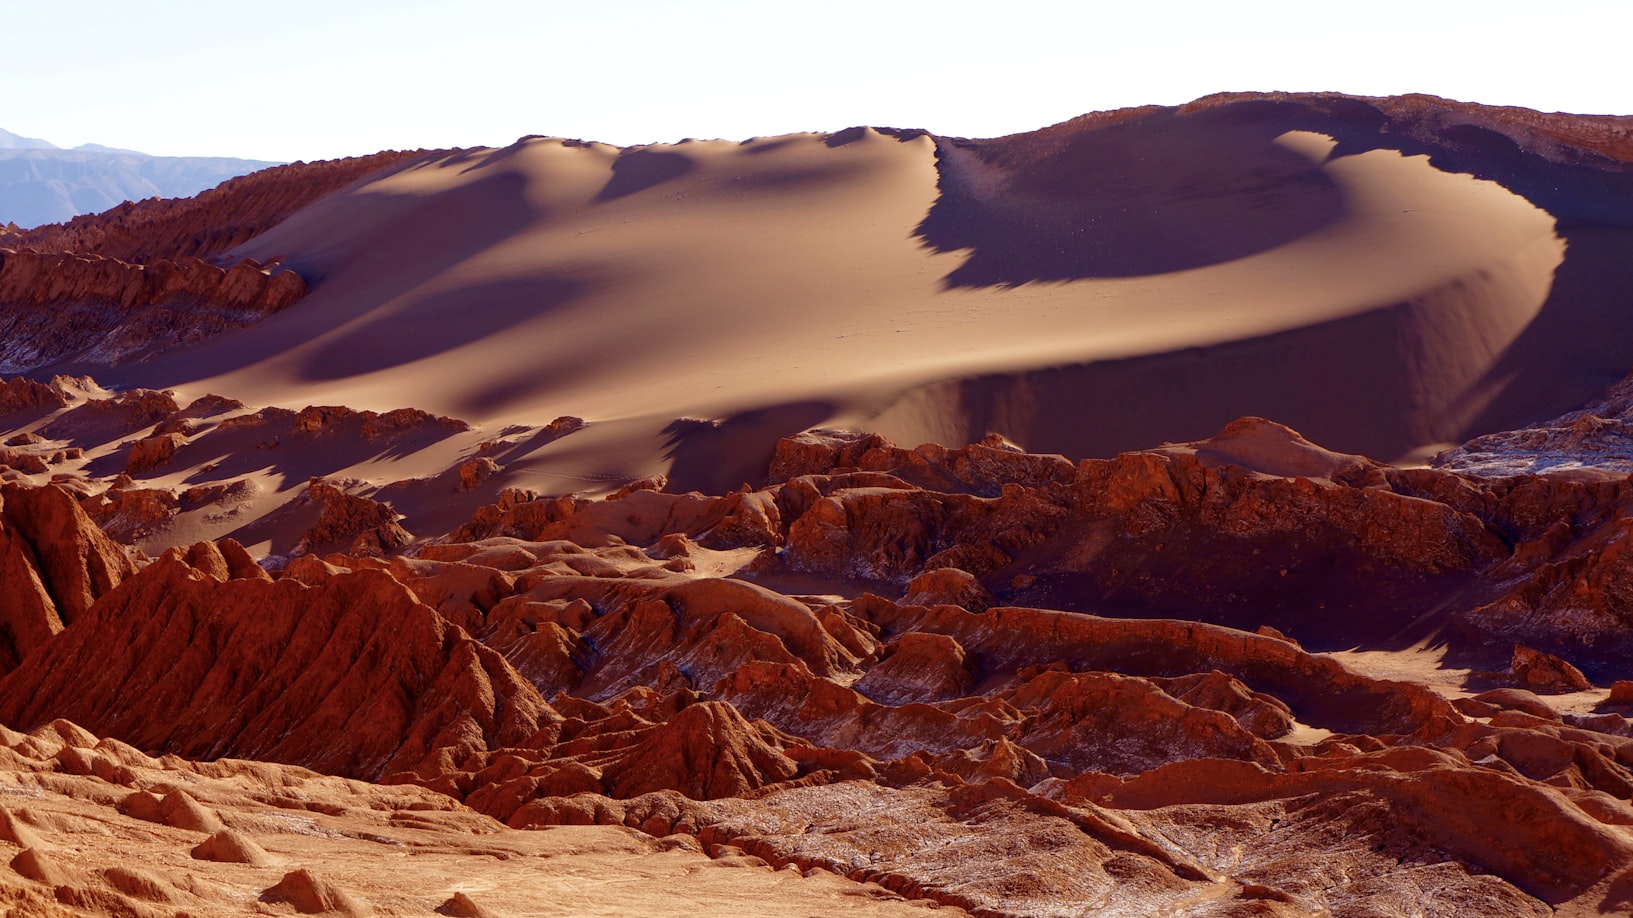 The Atacama Desert, located in Chile, is one of the driest places on earth,